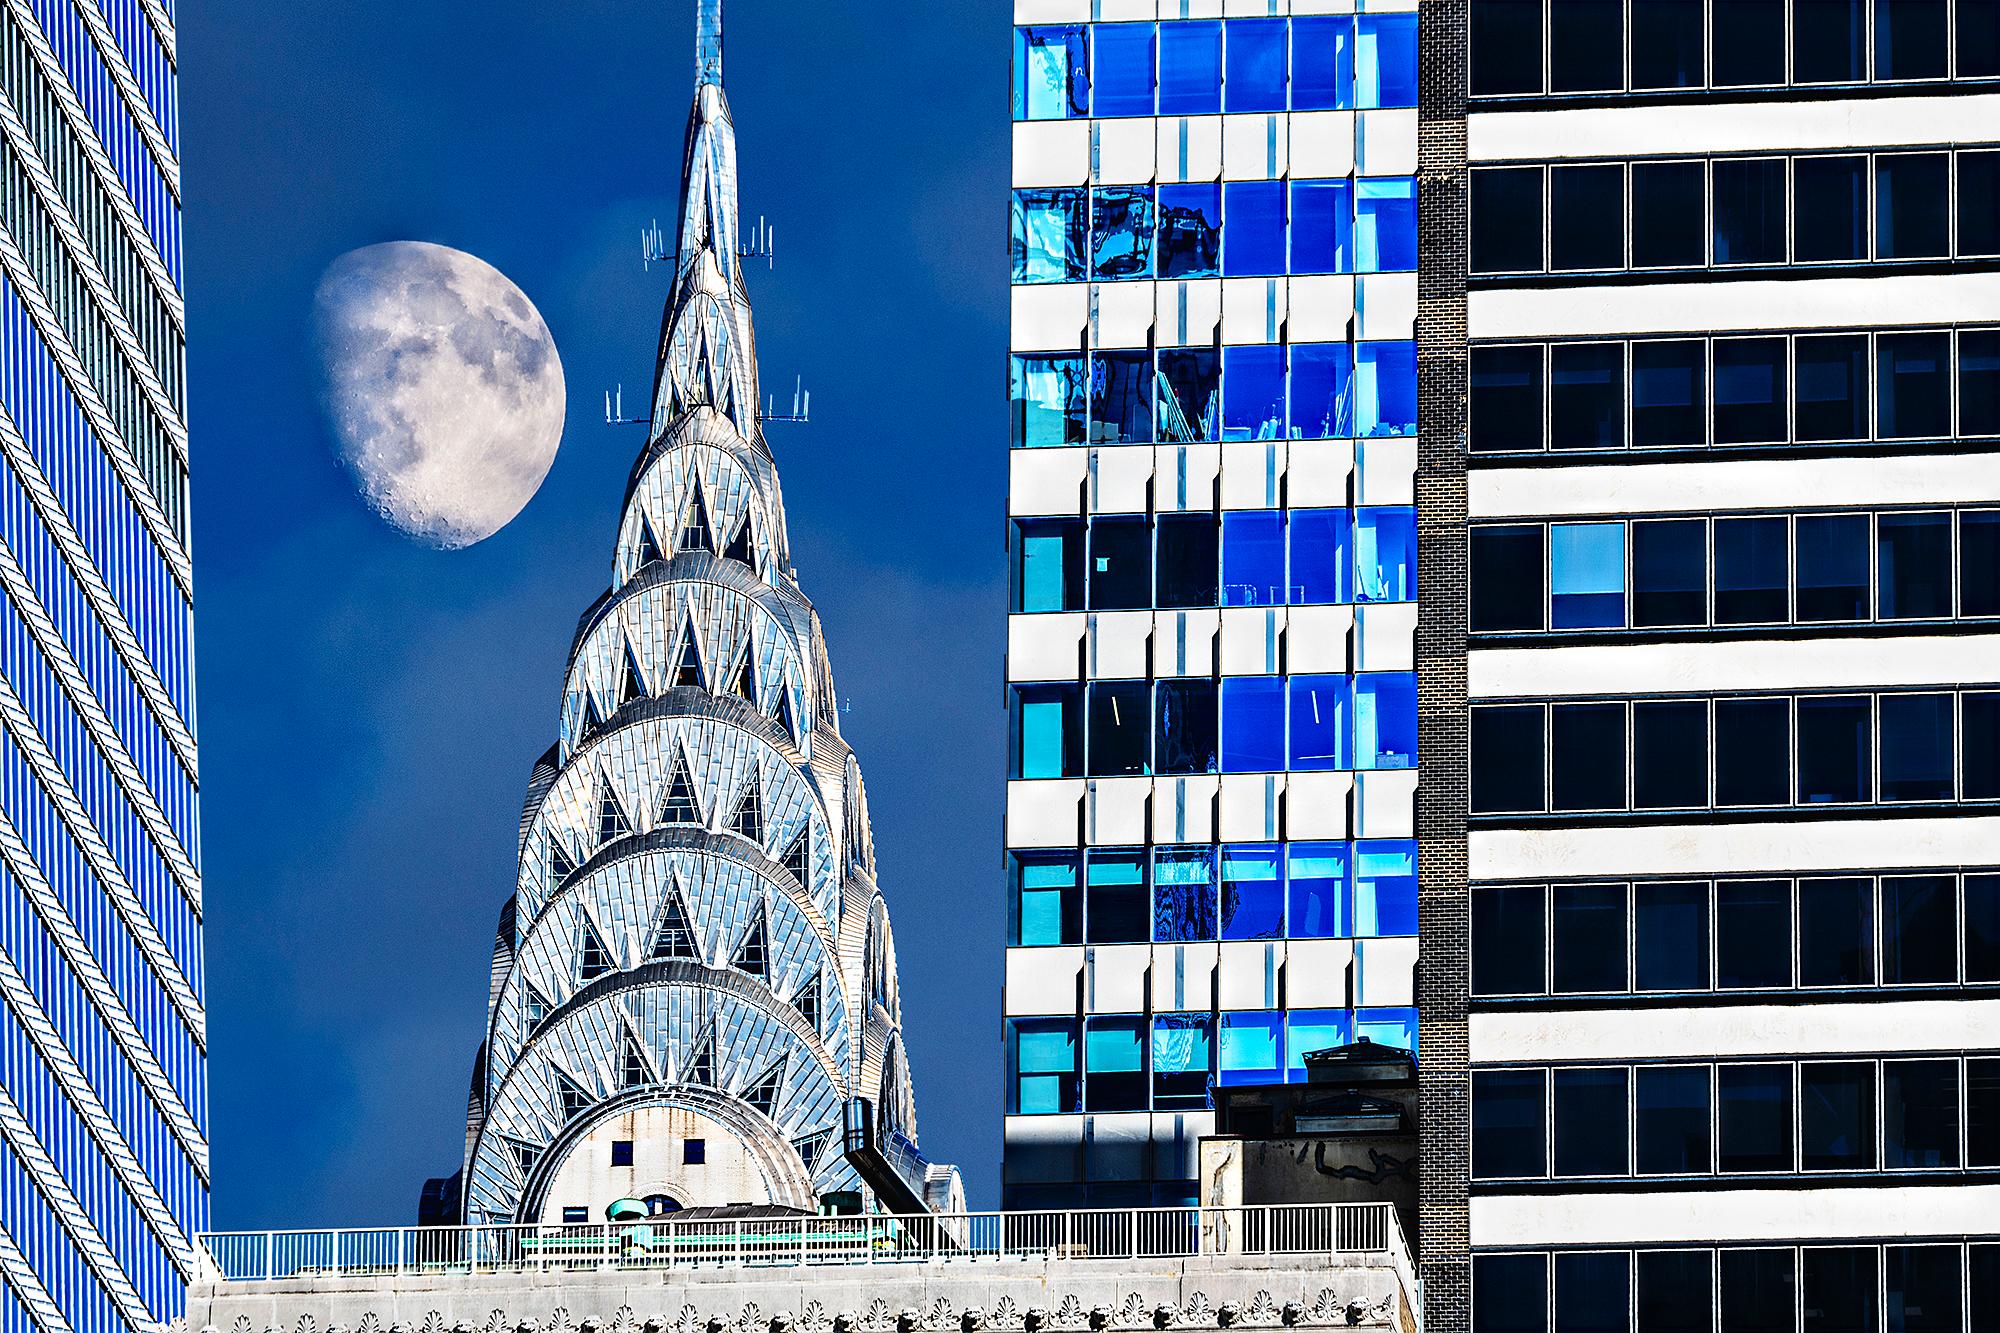 Mitchell Funk Color Photograph - Chrysler Building Spire with Moon   - Art Deco skyscraper